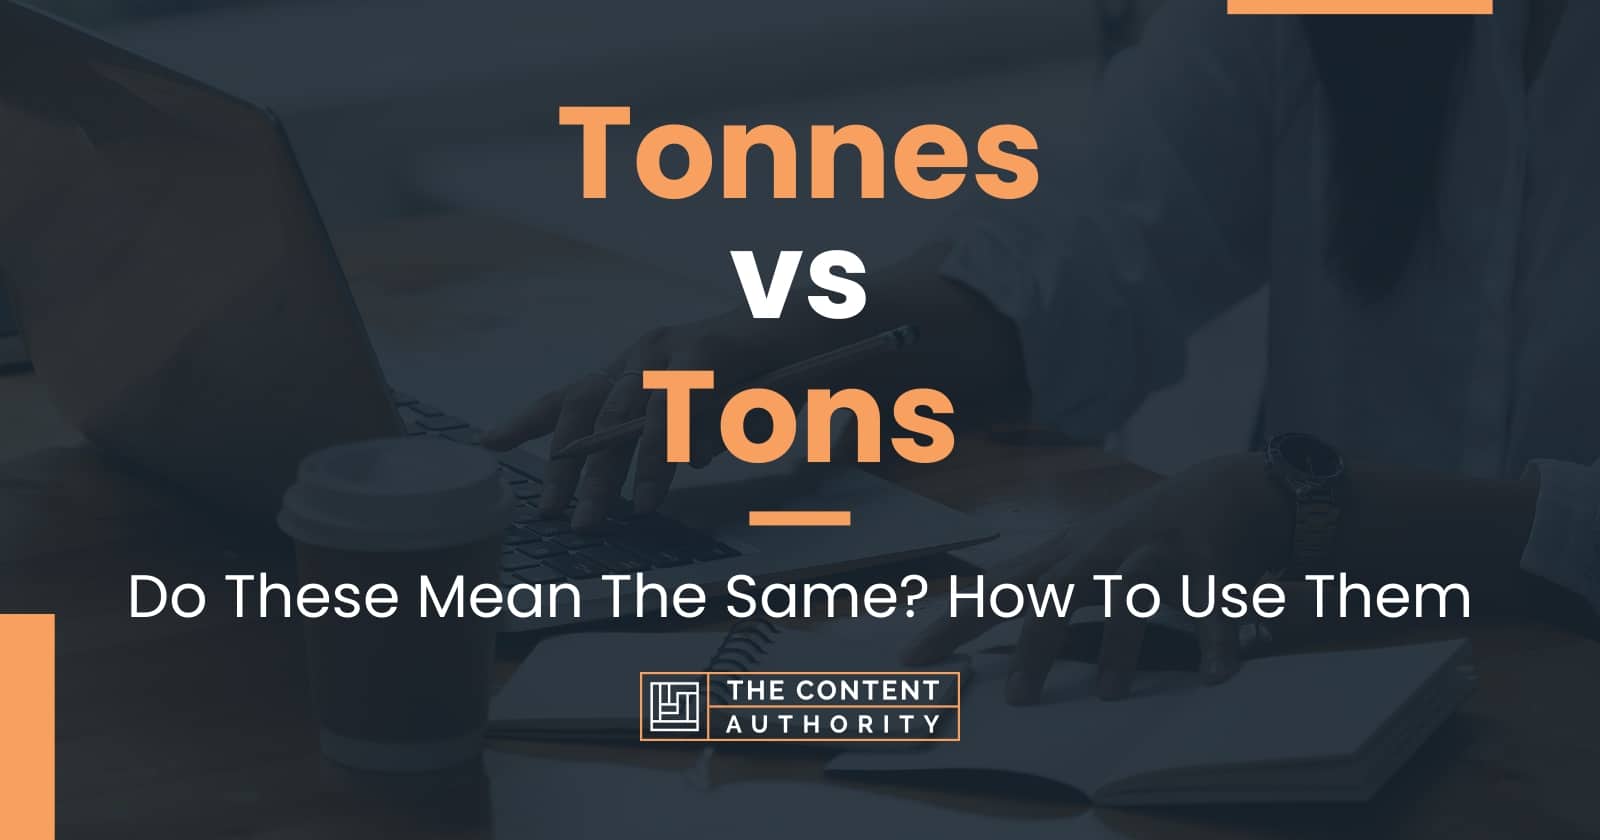 Tons vs. Tonnes: Did You Know? 